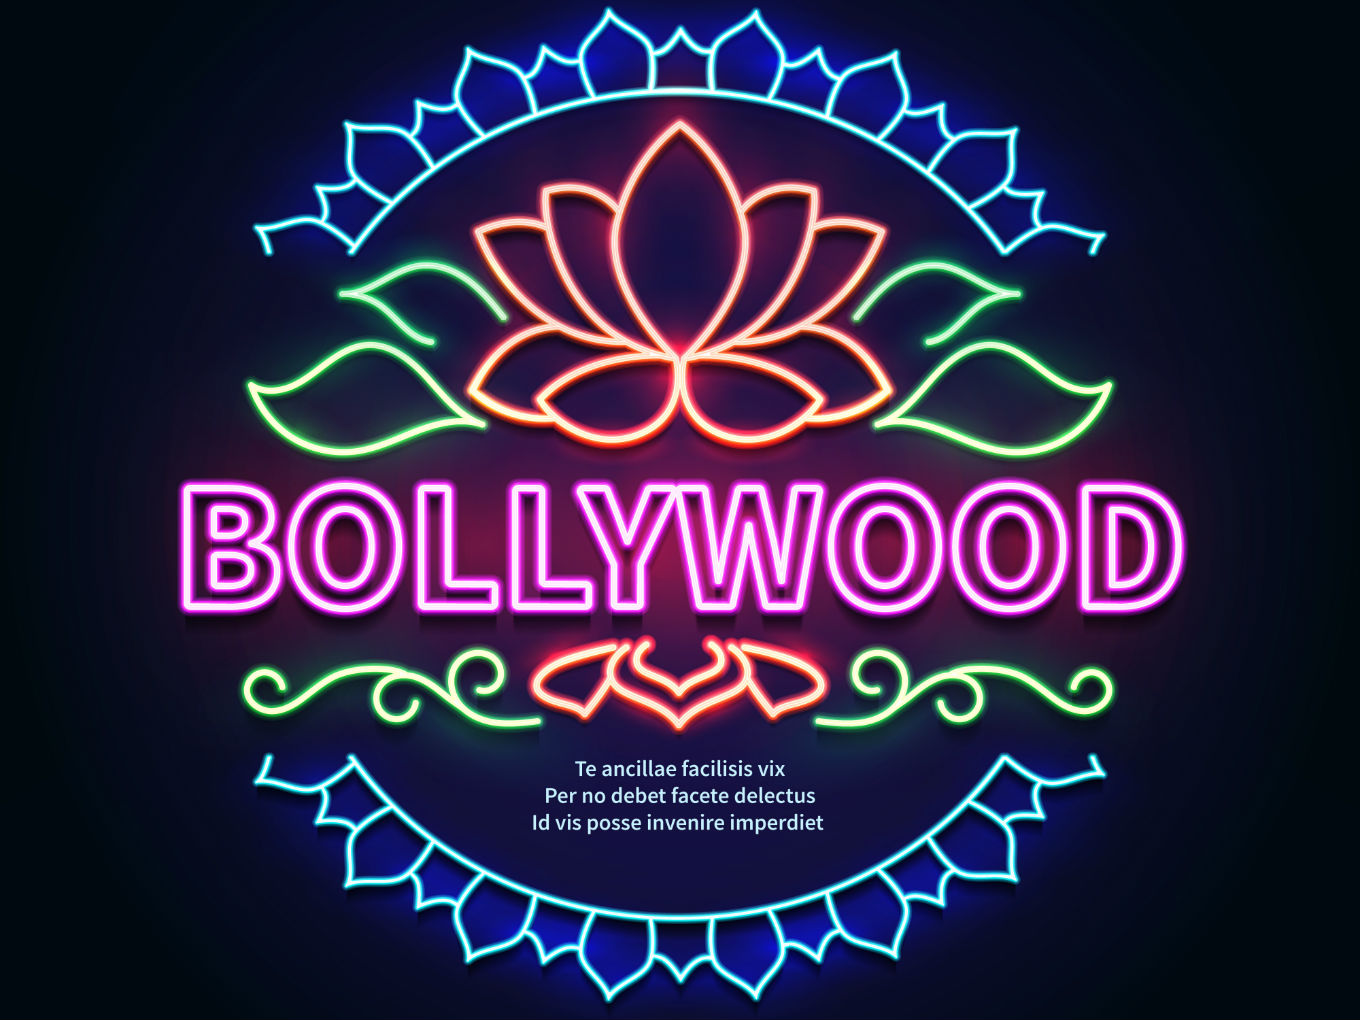 7 Bollywood Logo Stock Video Footage - 4K and HD Video Clips | Shutterstock